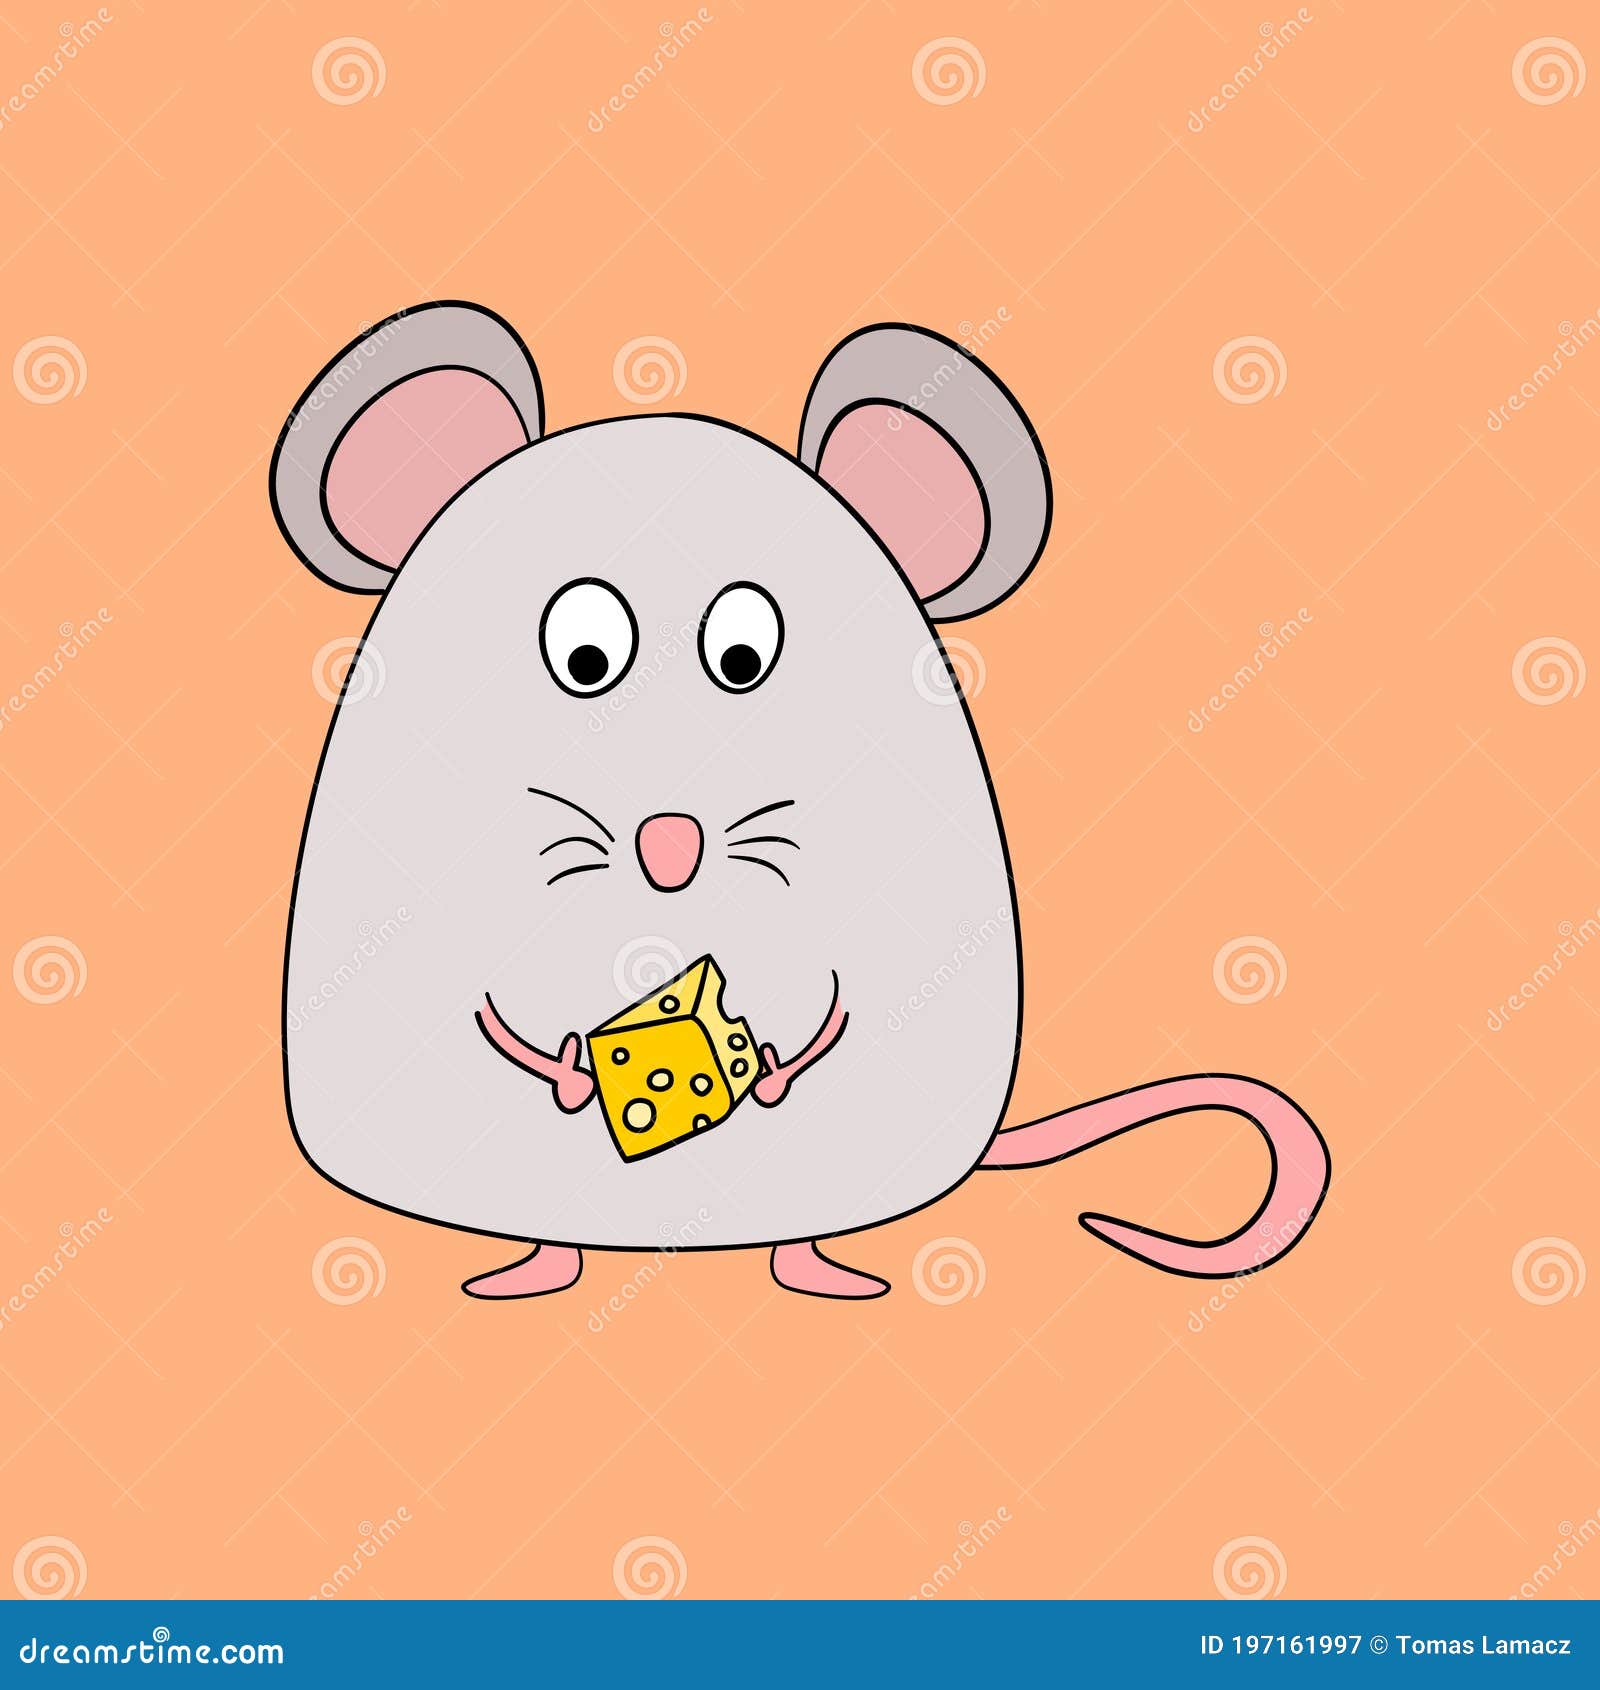 Cartoon Mouse Rat Character Holding a Cheese. Childish Drawing of a Simple  Funny Animal Mascot Stock Vector - Illustration of vintage, simple:  197161997